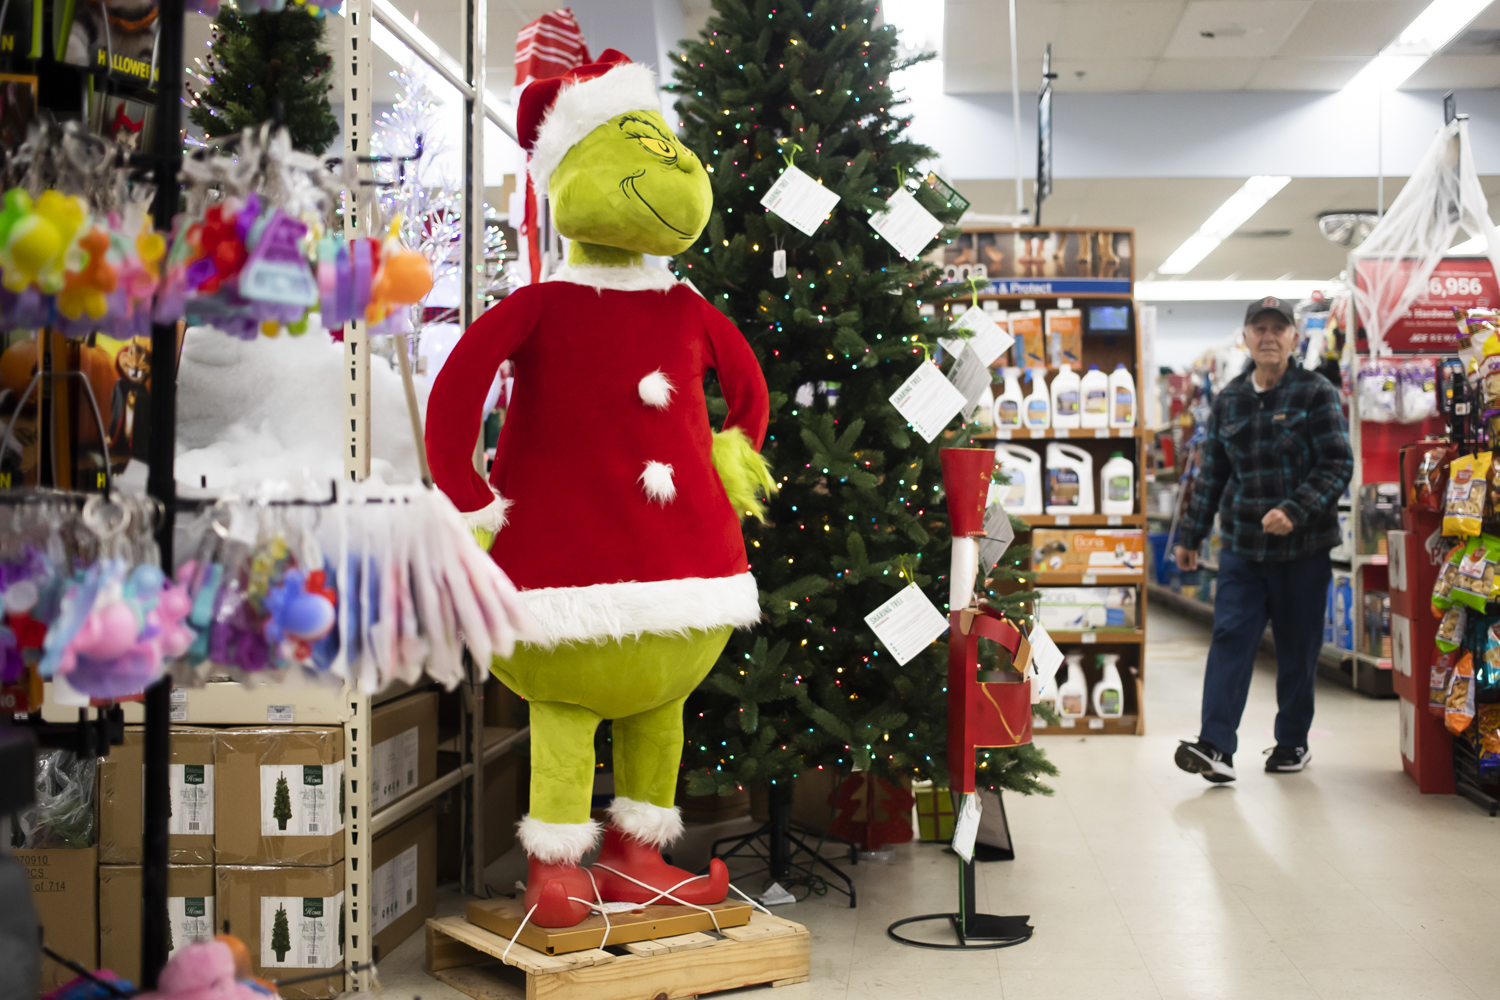 Midland's Sharing Tree grants holiday wishes for local families